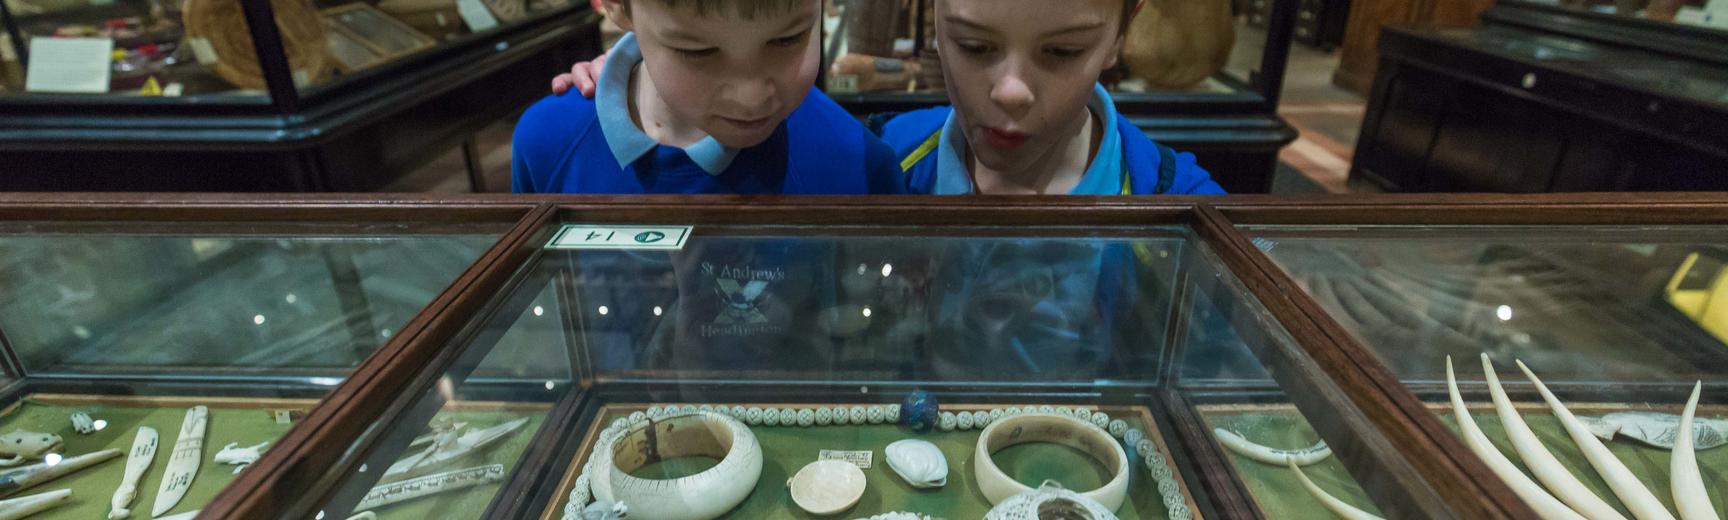 Two boys dressed in school uniform stare in wonder at objects intricately carved from ivory in the case in front of them.